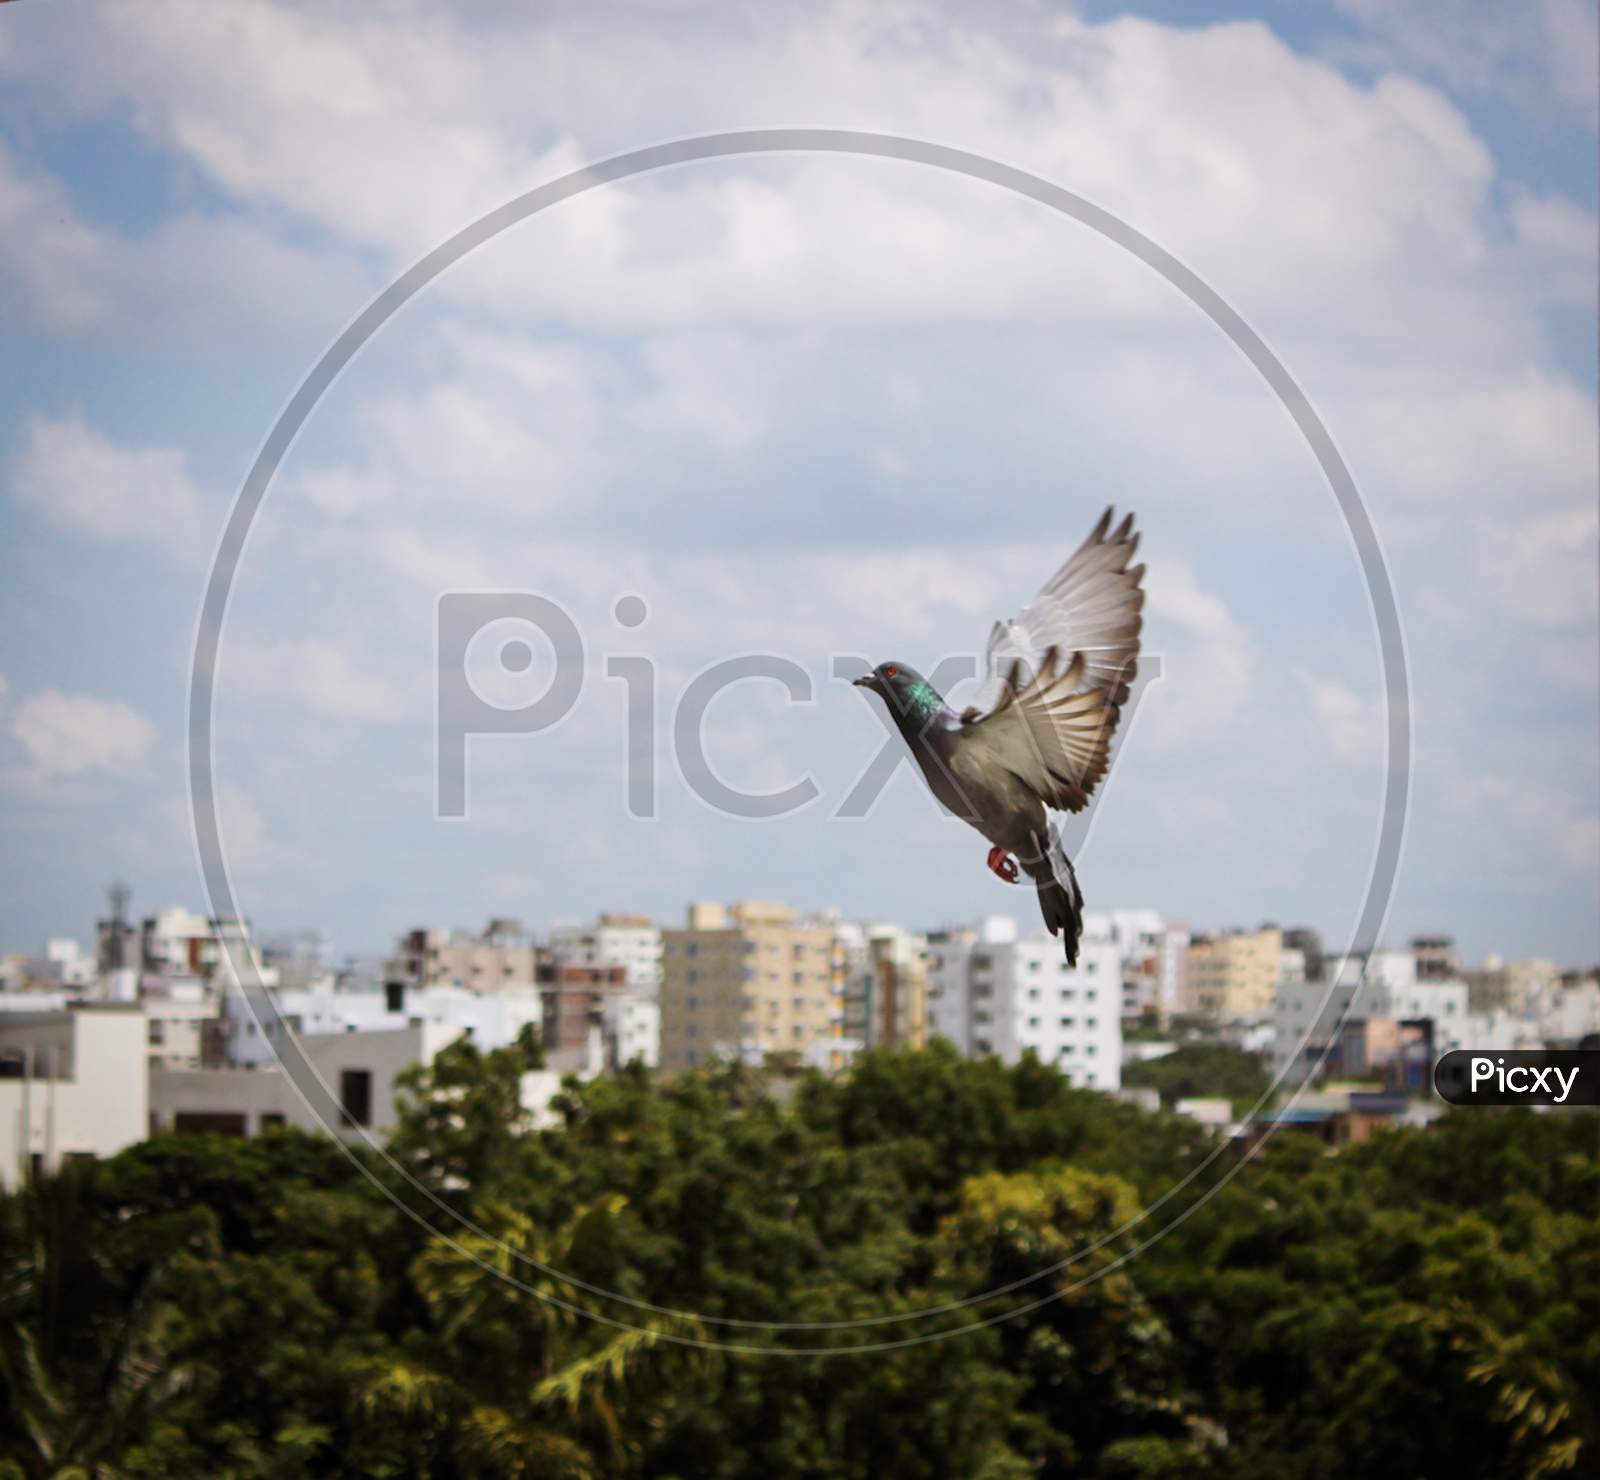 A flying pigeon